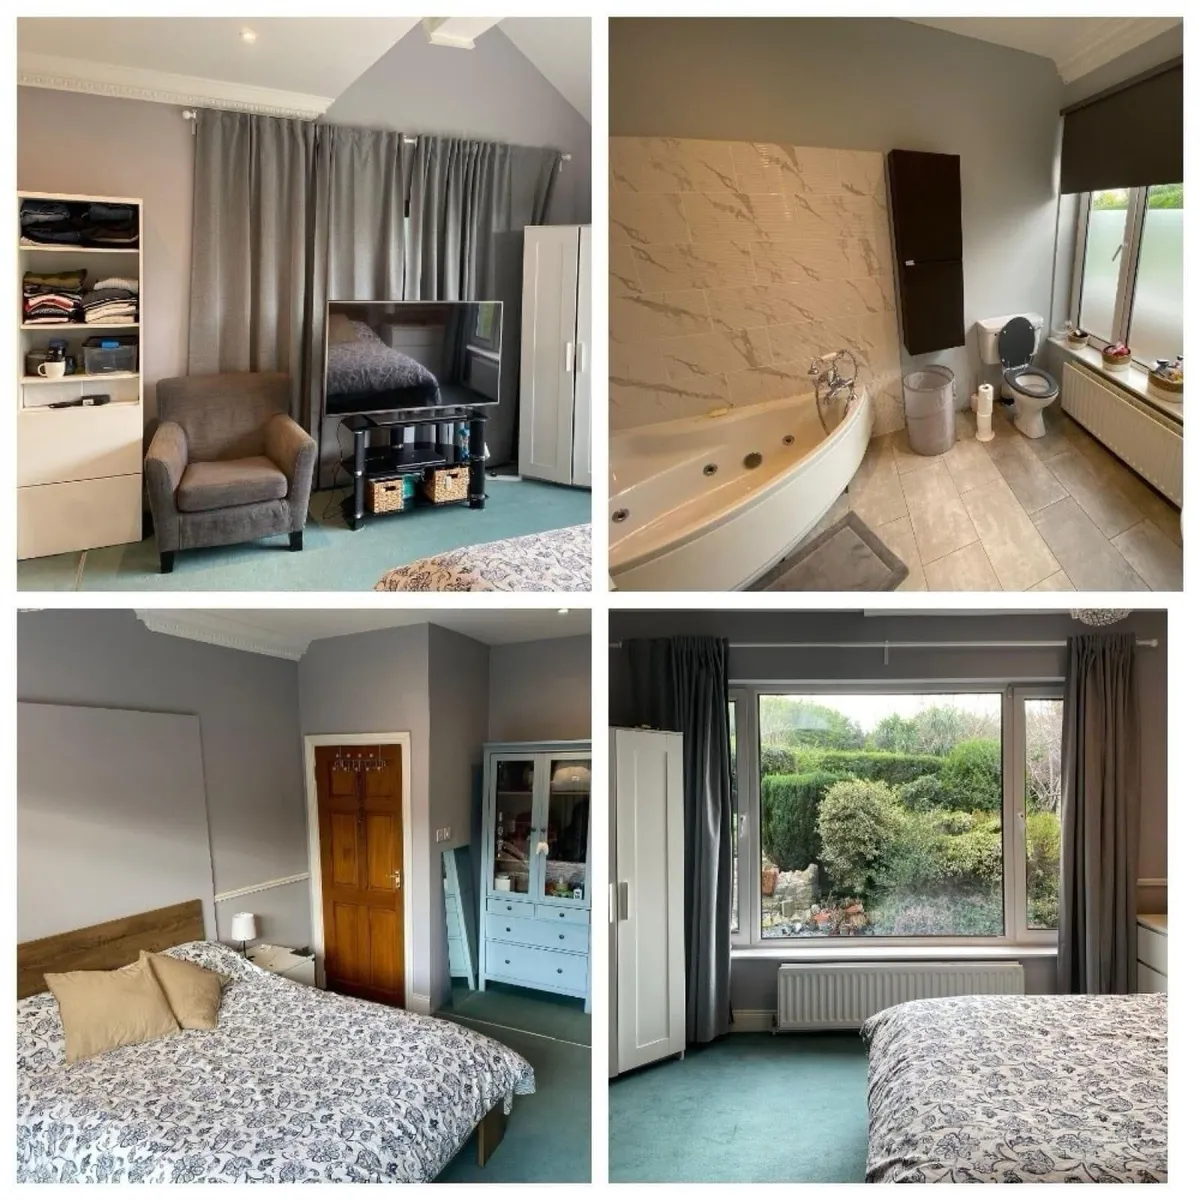 ROOMS FOR RENT IN DUBLIN 18 single&double - Image 1